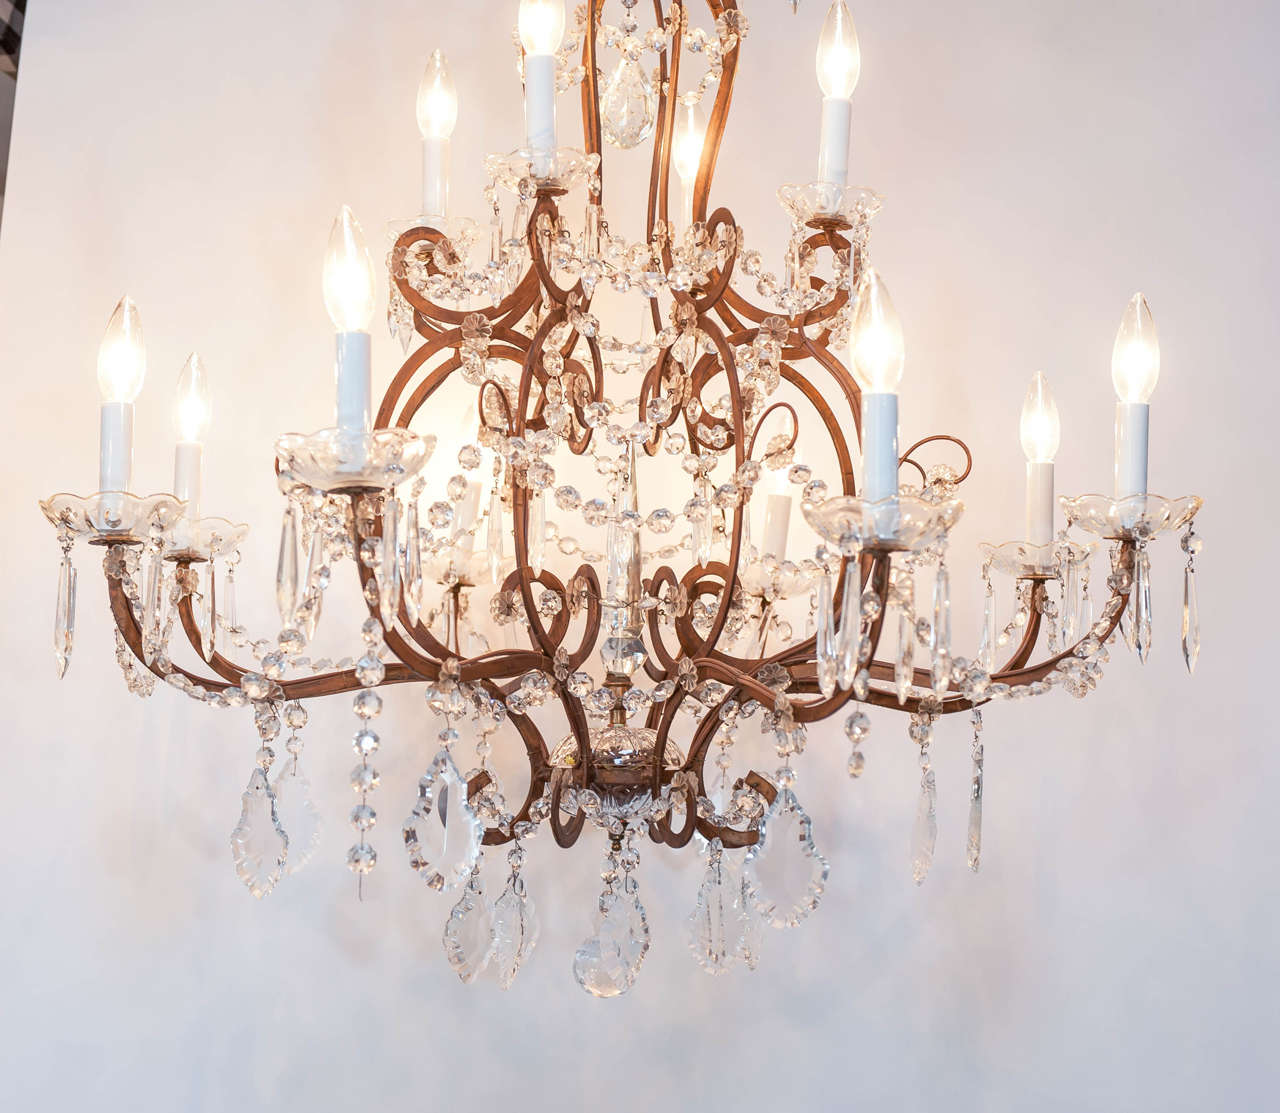 Pair of 20th century crystal chandeliers in pressed metal carcass, circa 1940, France.